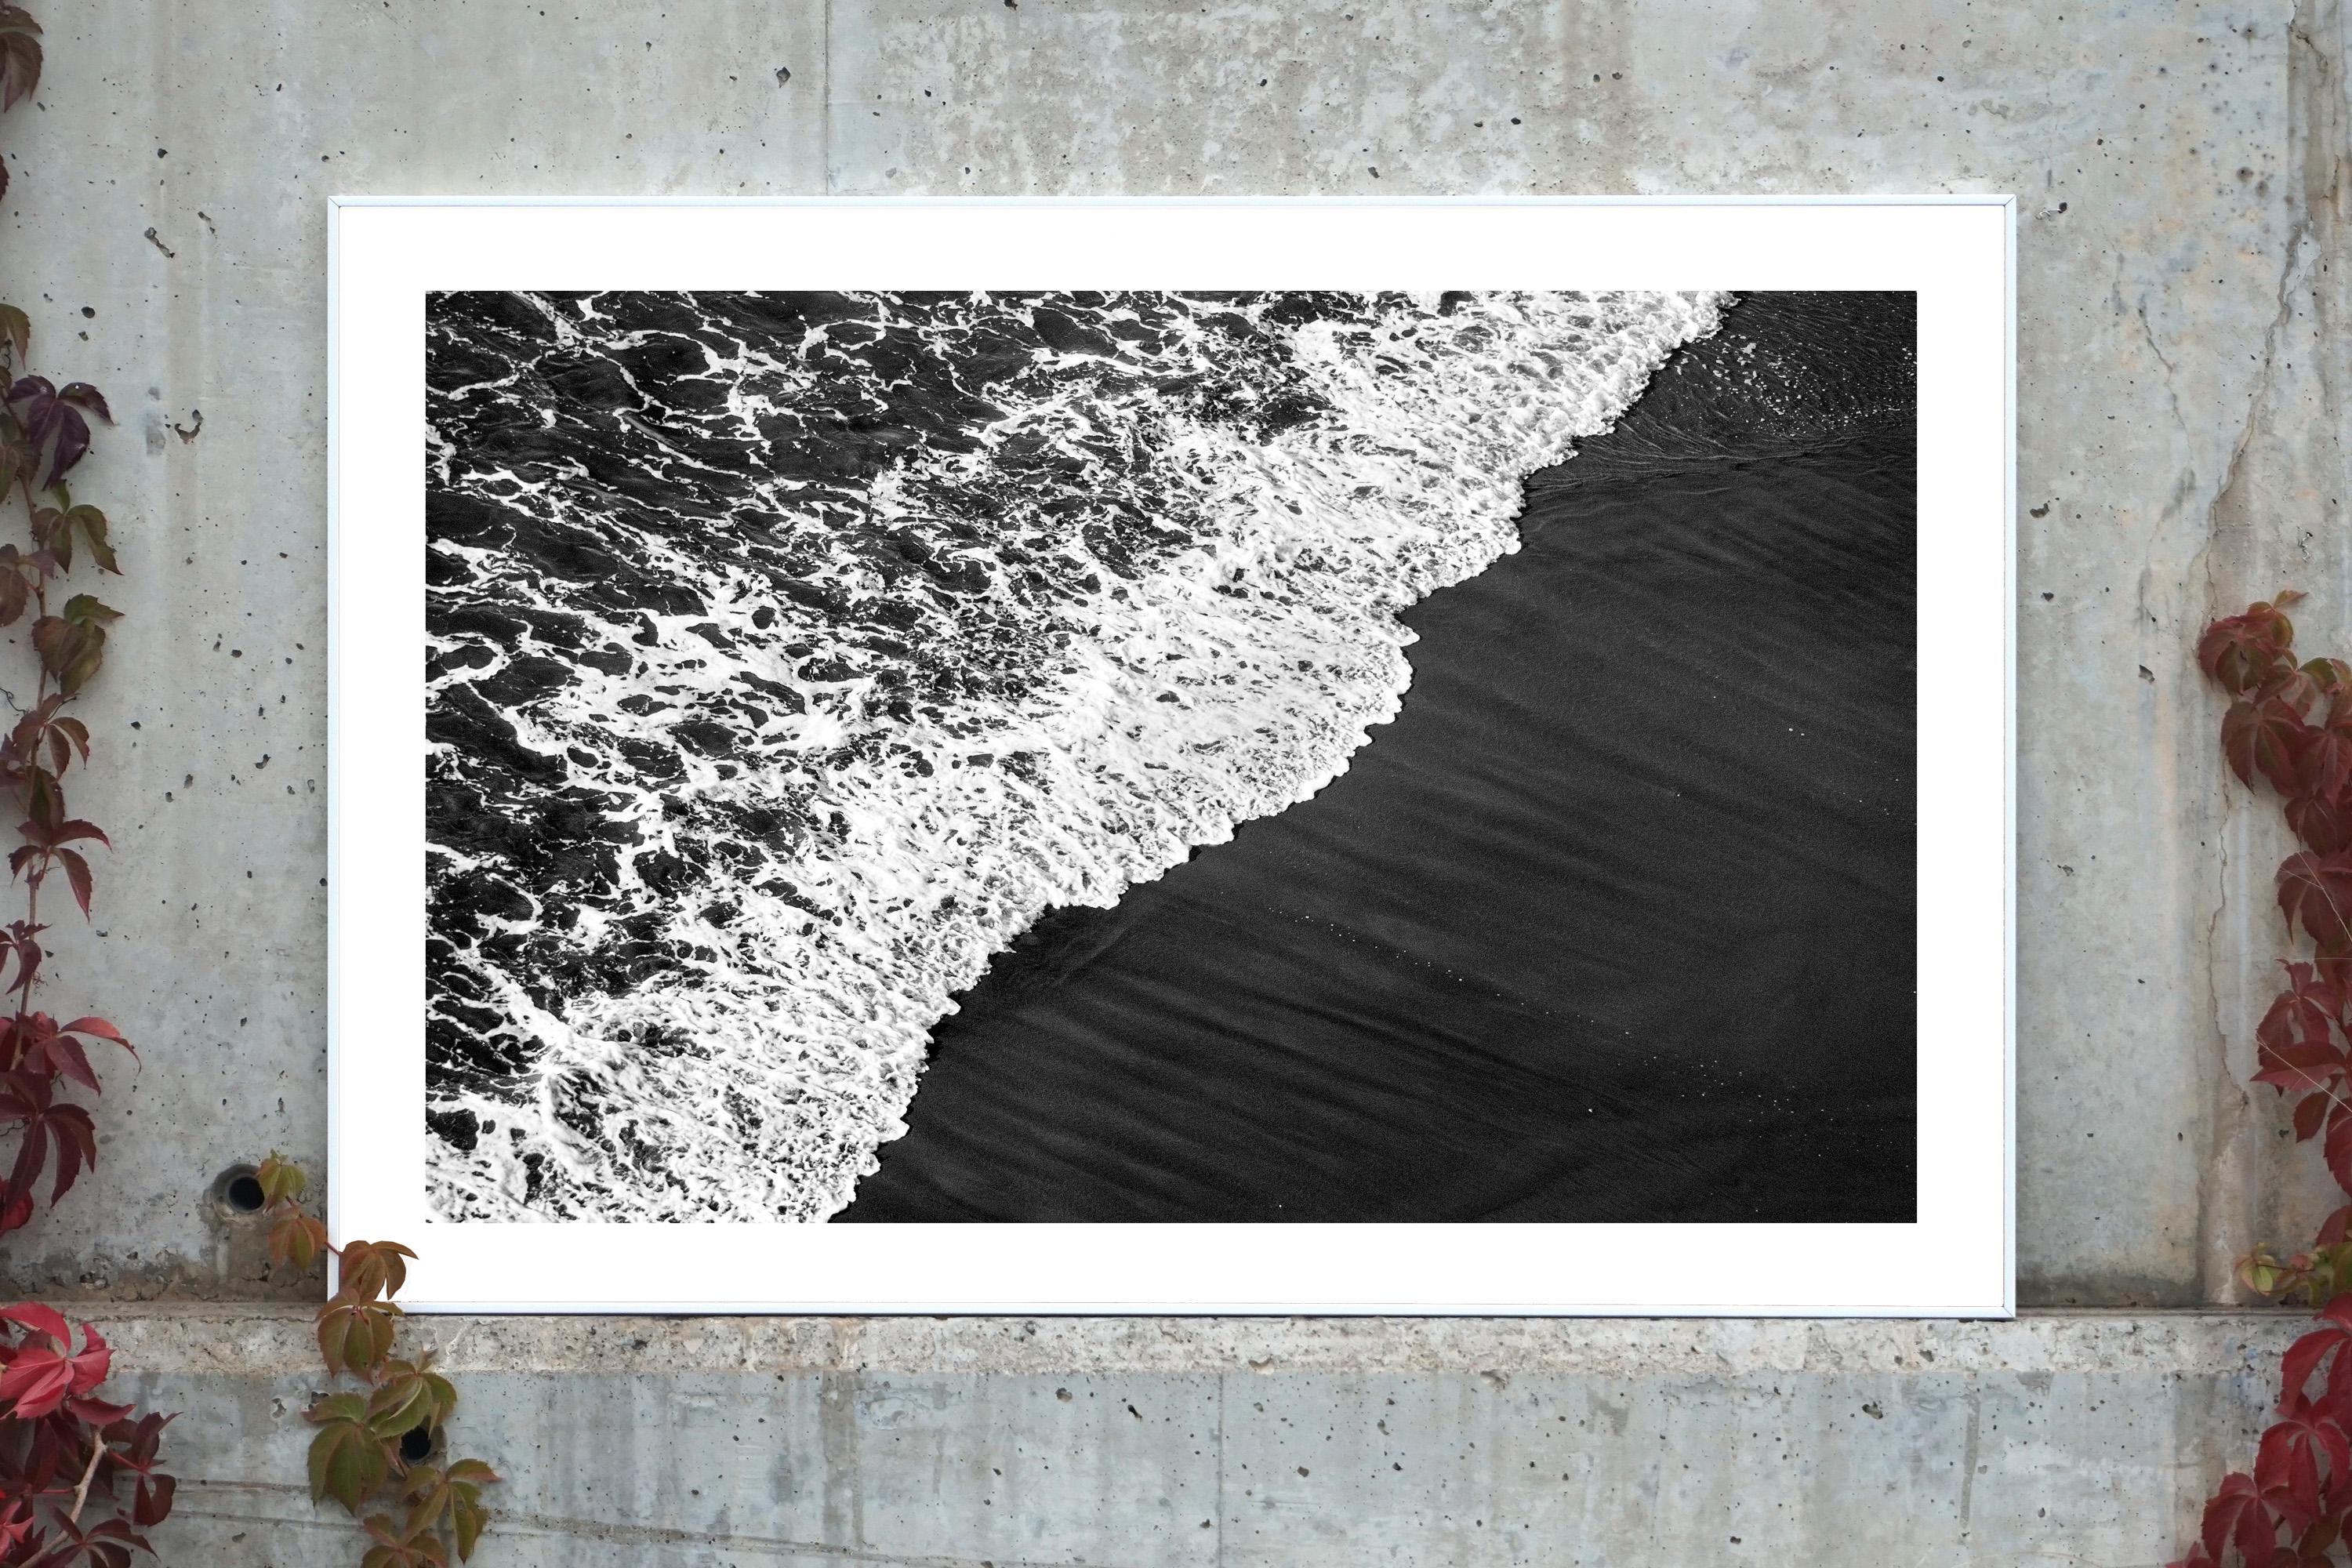 Deep Black Sandy Shore, Black and White Seascape, Smooth Wave Reaching the Coast - Photograph by Kind of Cyan